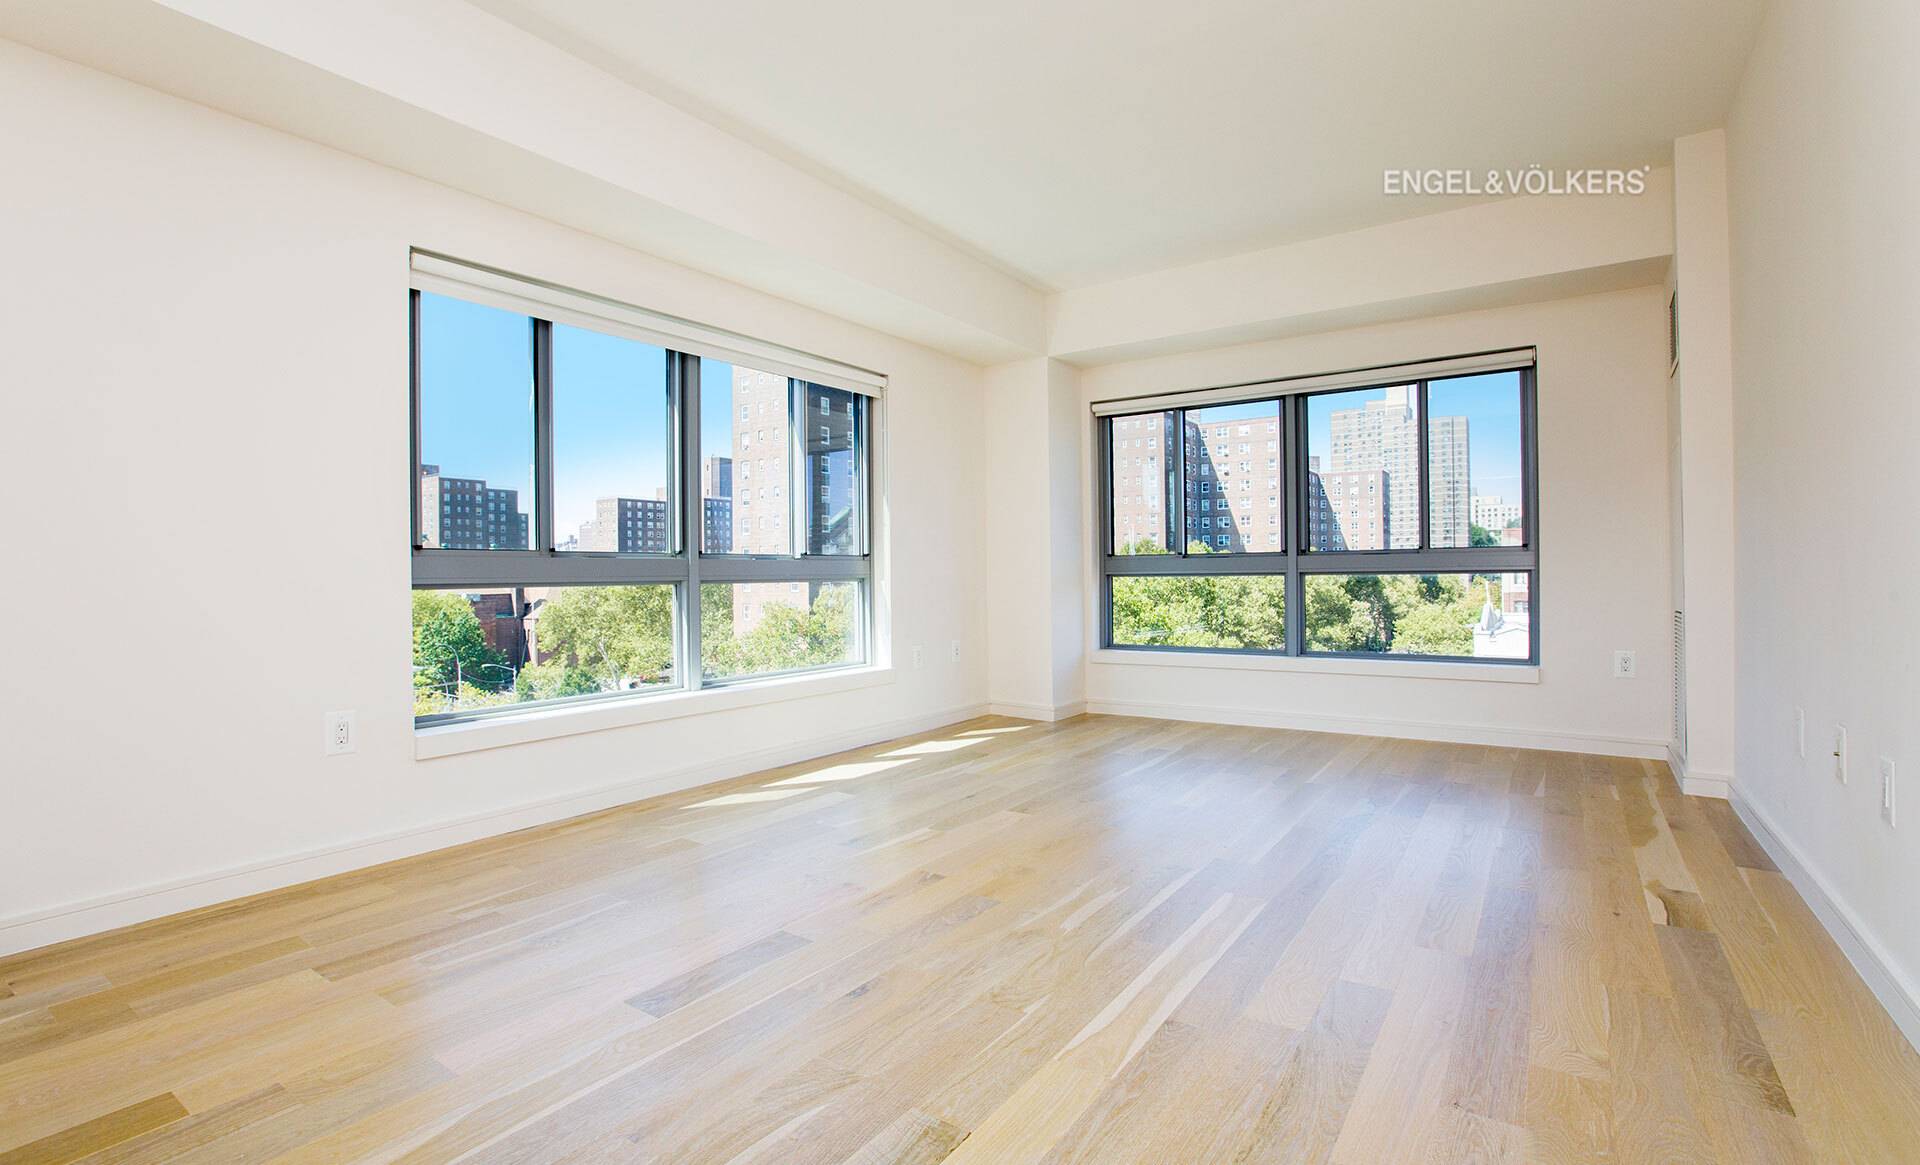 Sought after corner two bedroom, two full bath featuring dual exposures to the south and west overlooking the tree lined boulevard and historic Harlem townhouses.